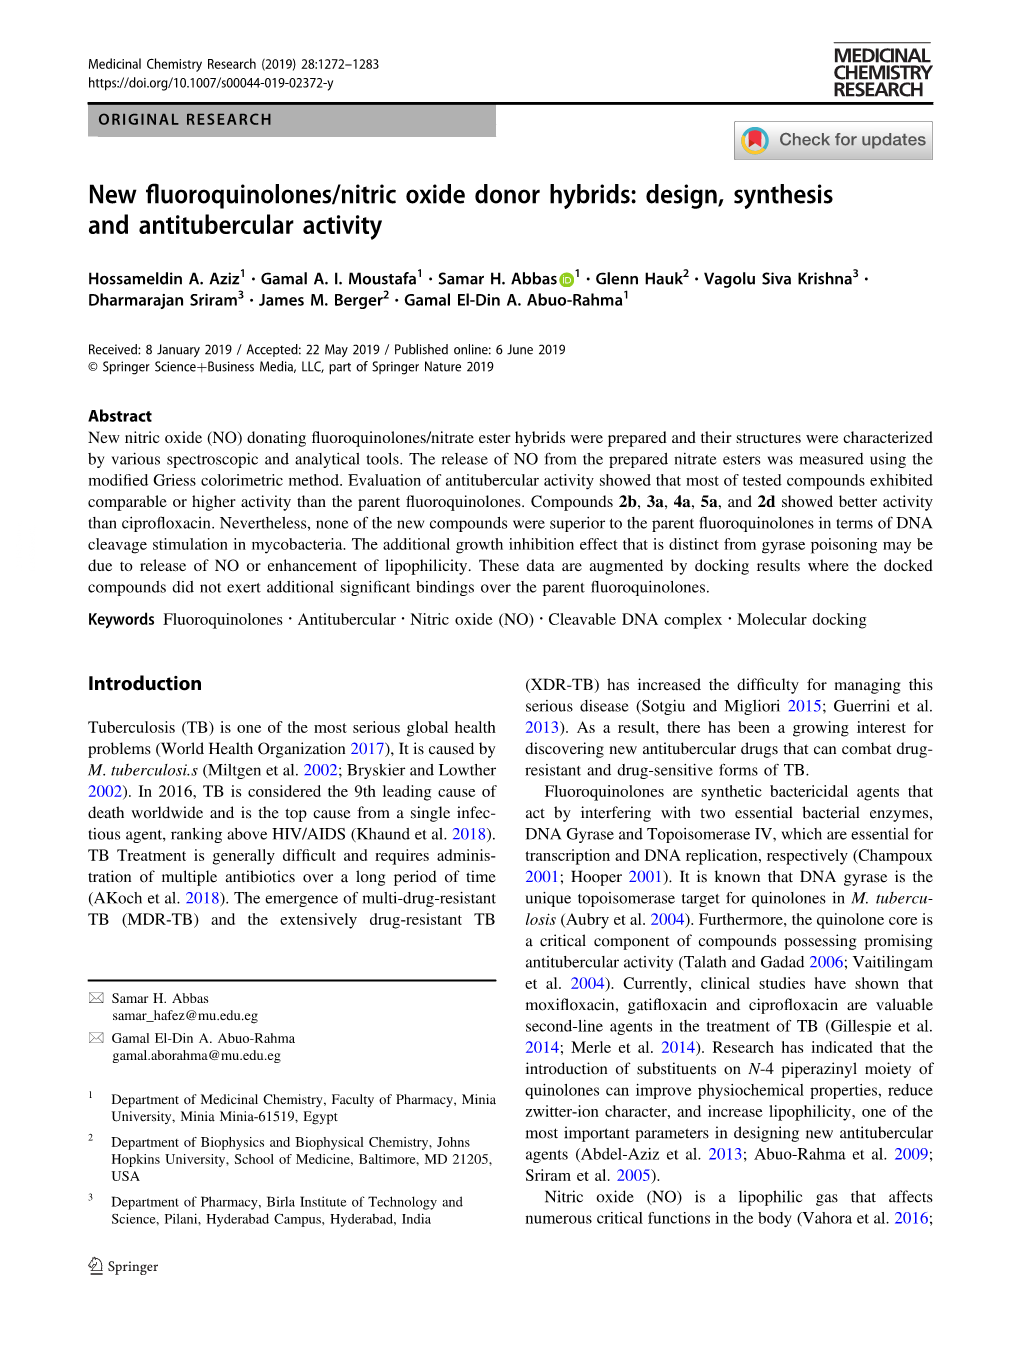 New Fluoroquinolones/Nitric Oxide Donor Hybrids